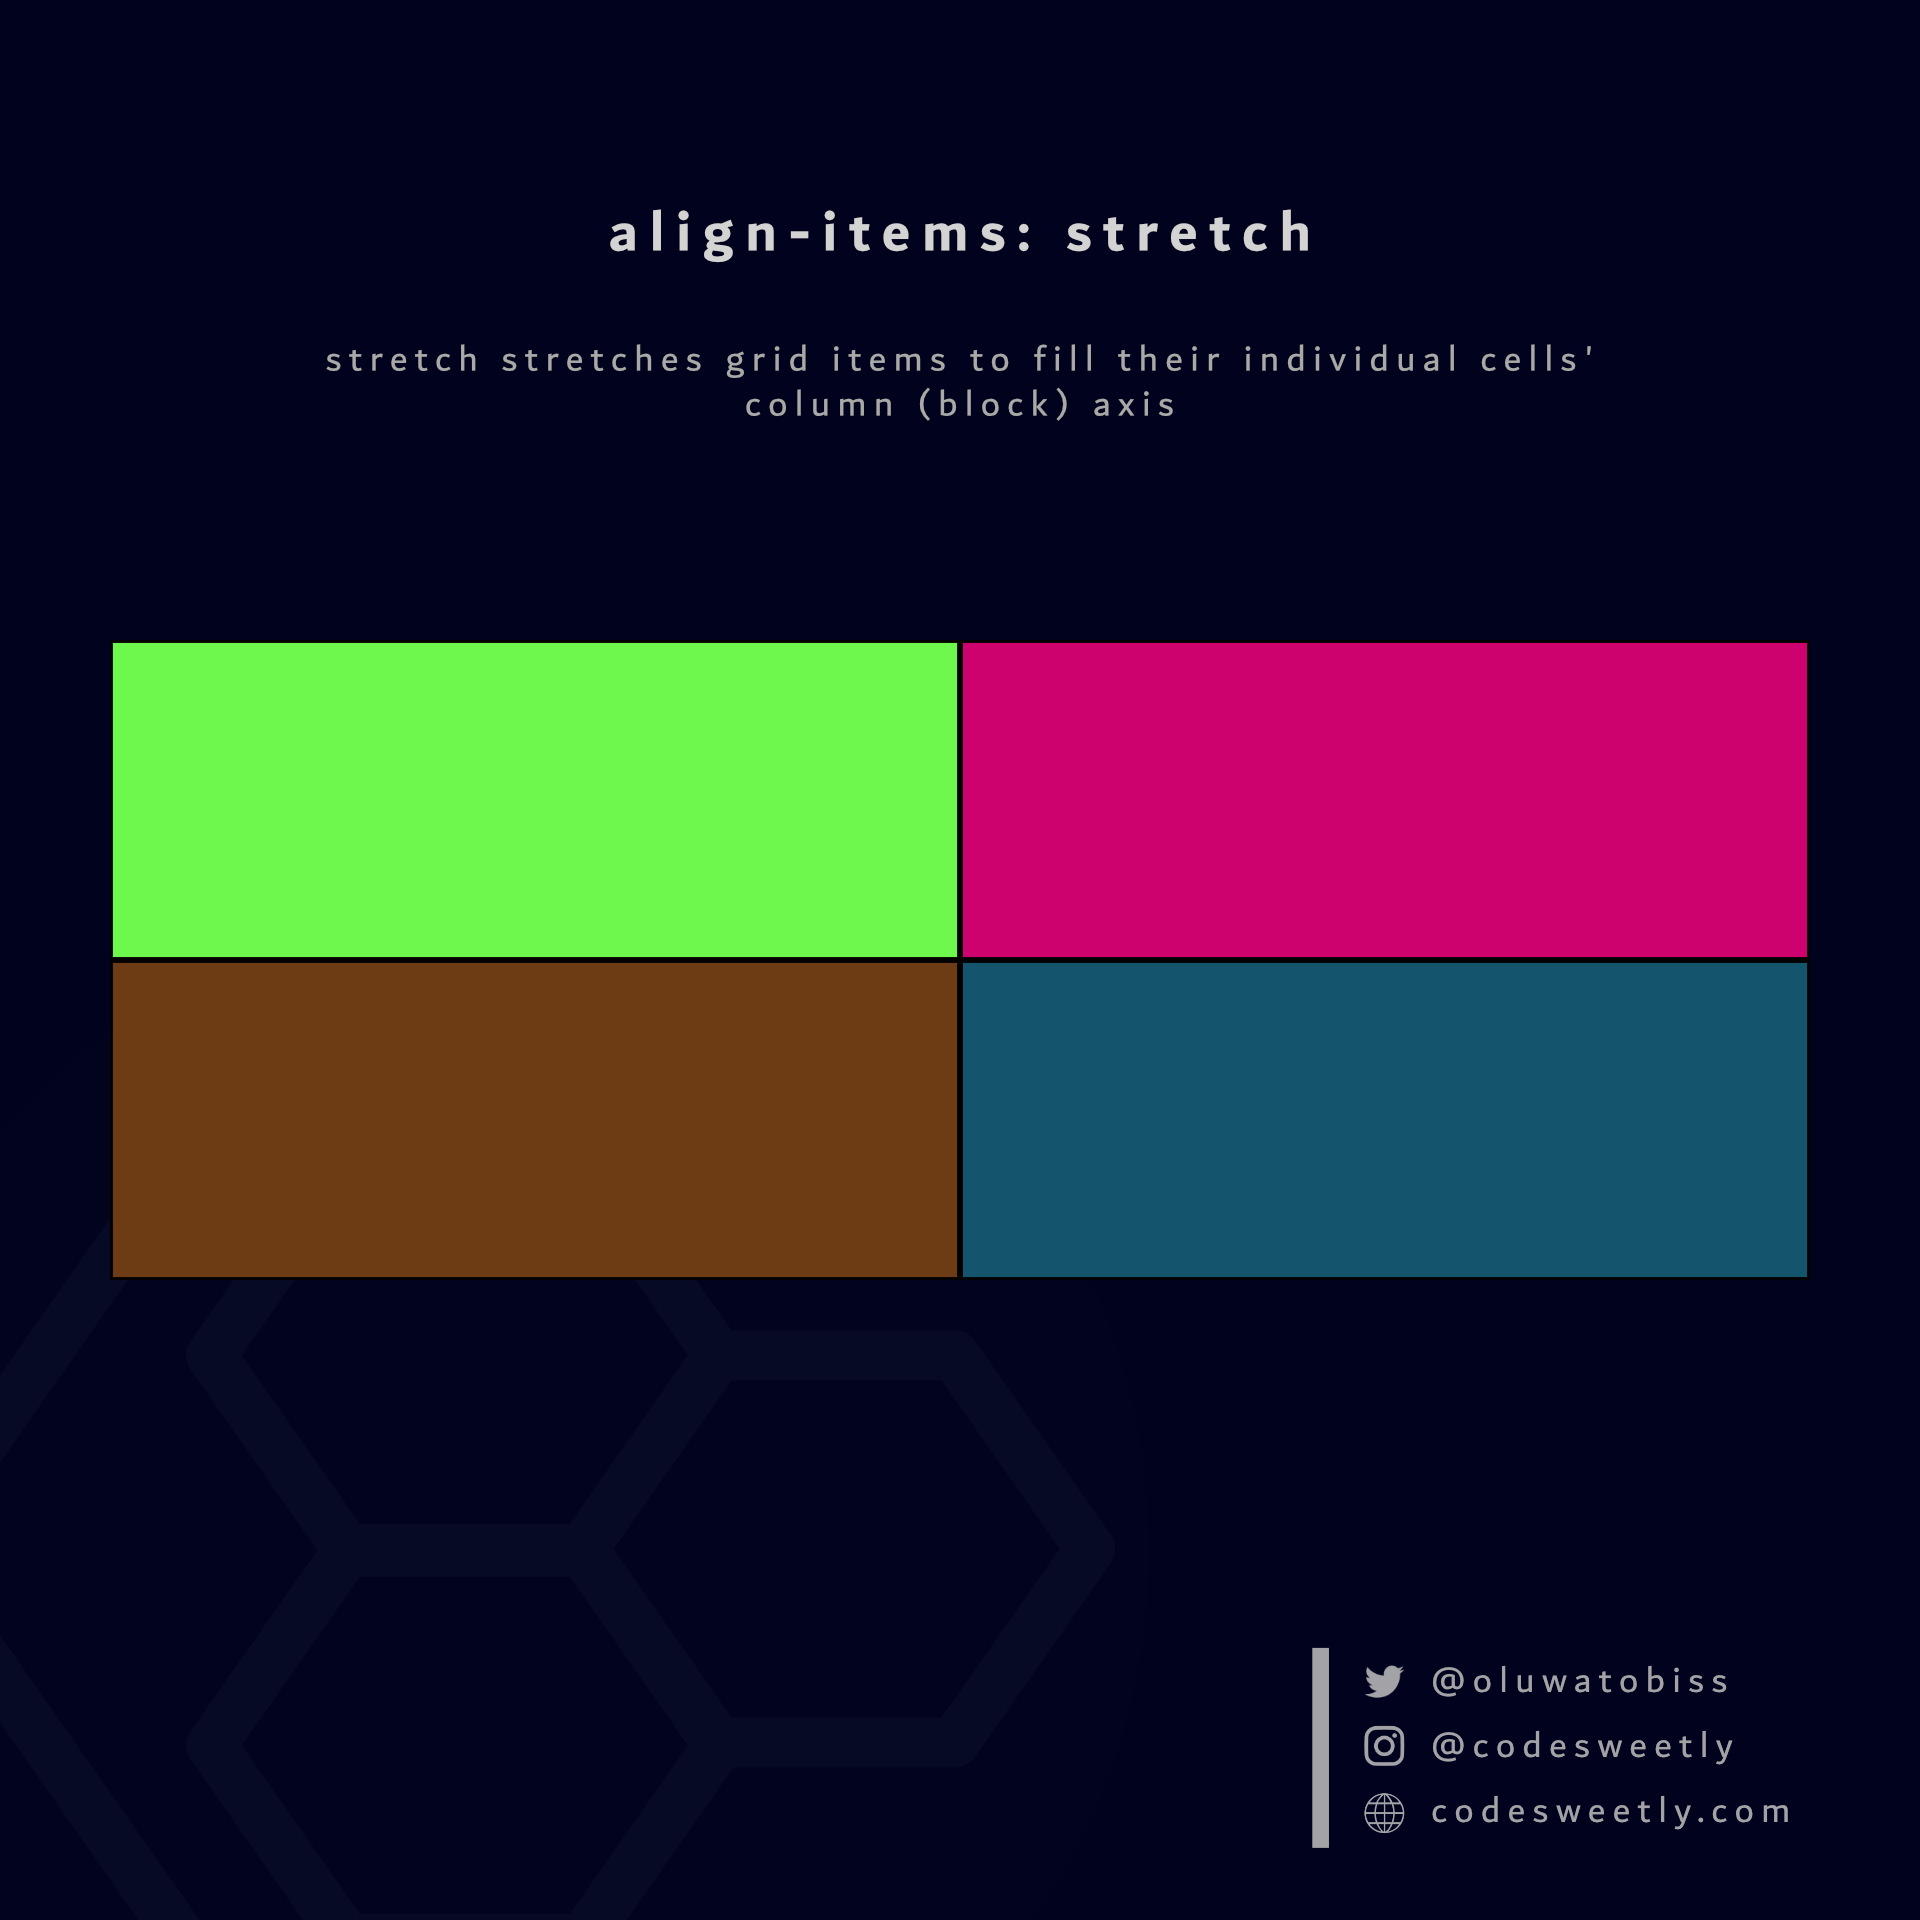 Illustration of align-items' stretch value in CSS Grid